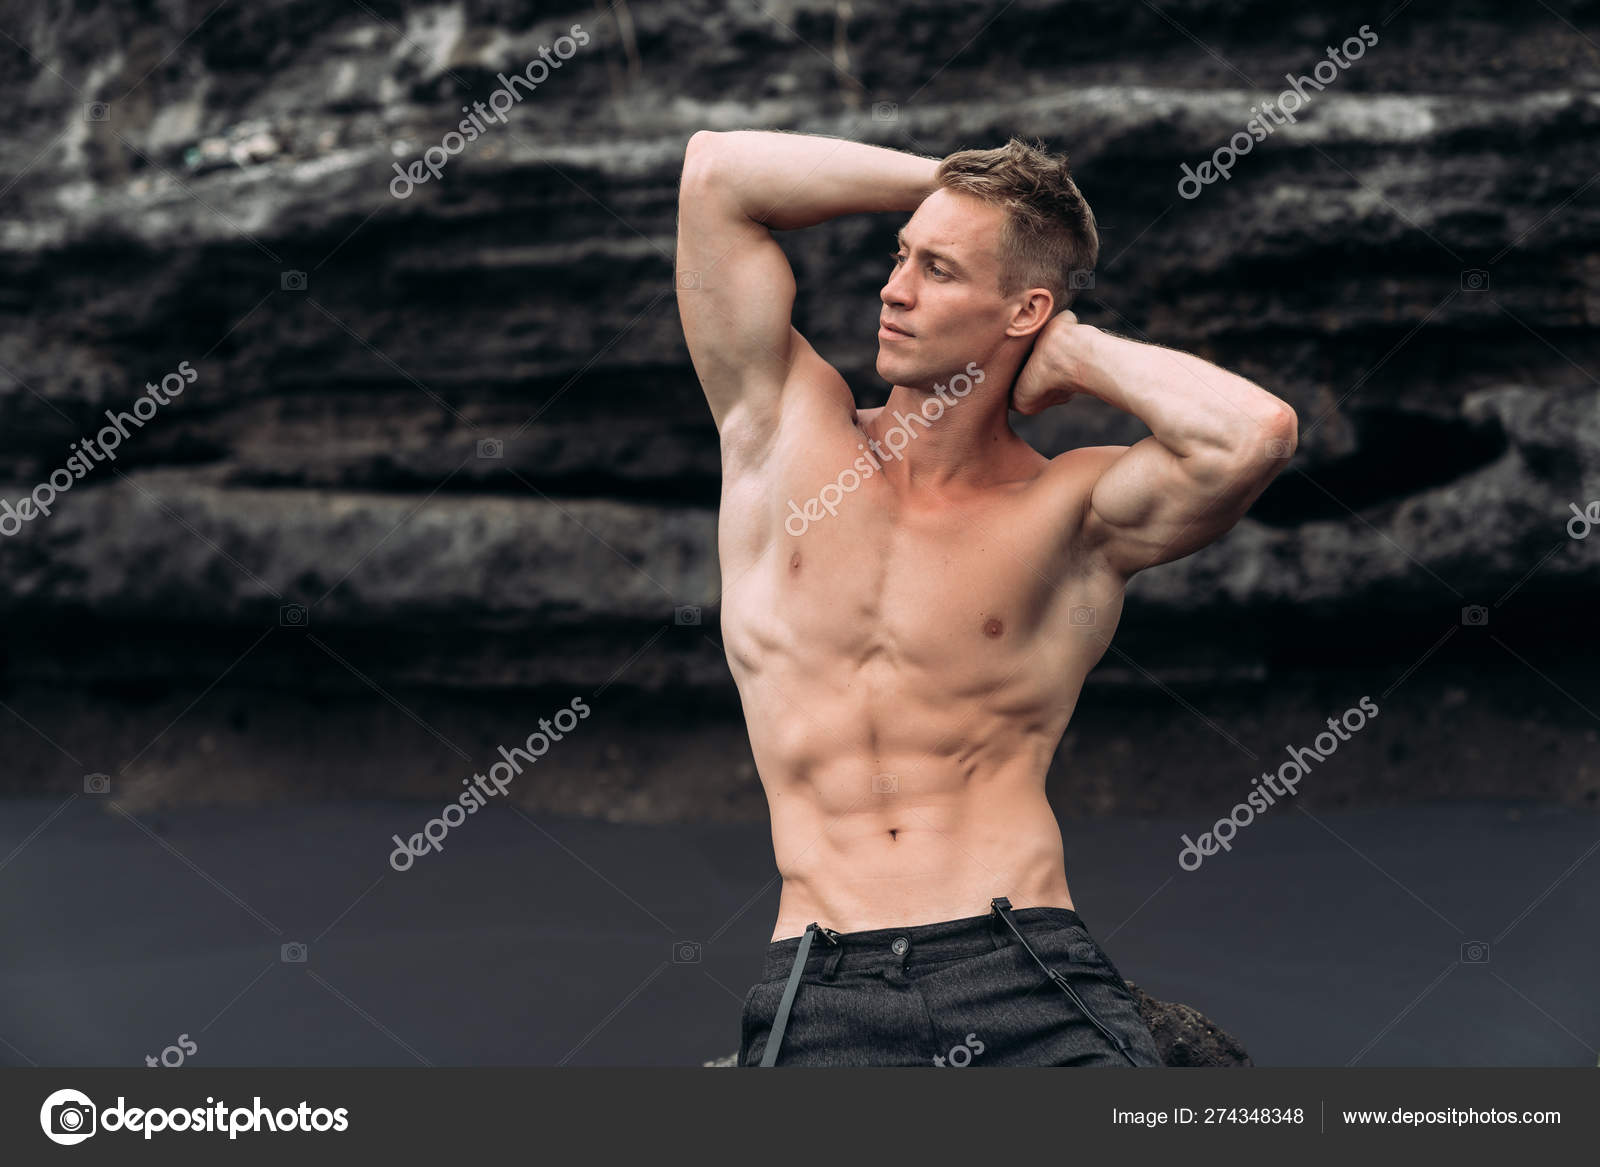 𝐇 𝐚 𝐬 𝐭 𝐚 𝐞 𝐥 𝐟 𝐮 𝐞 𝐠 𝐨 | Photography poses for men, Male  portrait poses, Beach photography poses